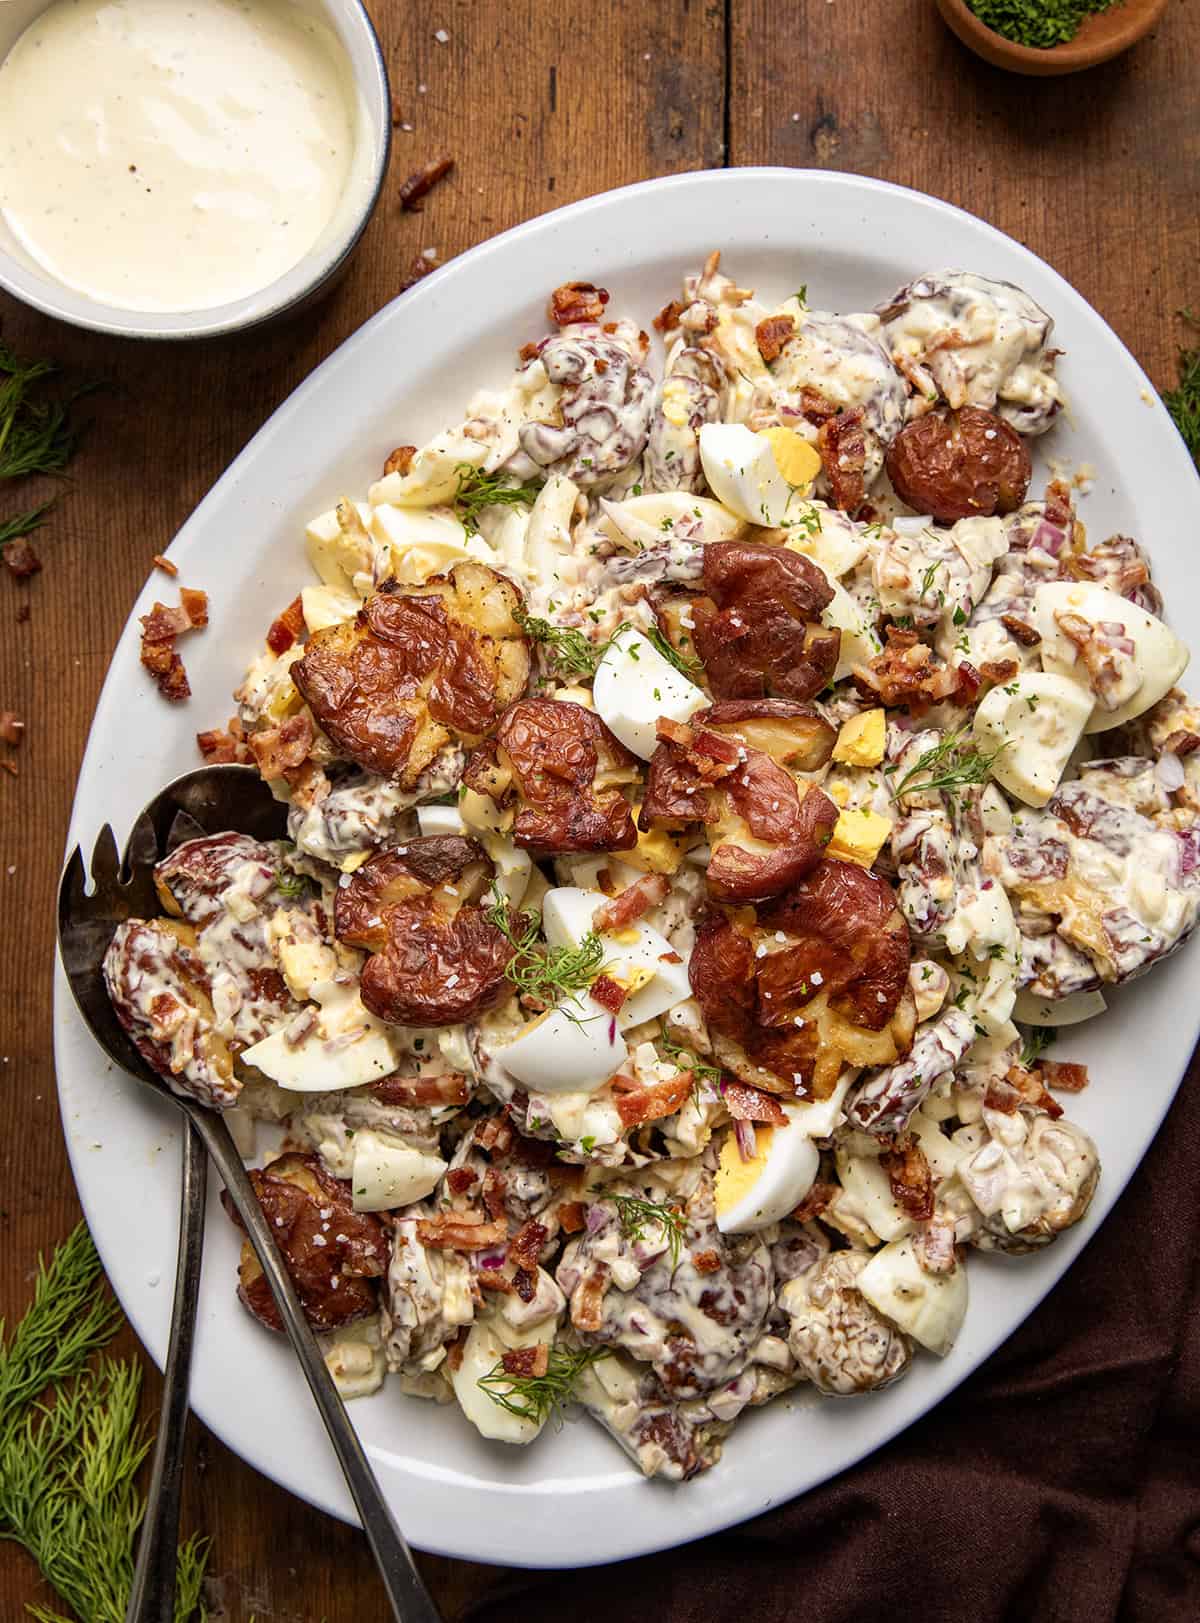 Platter of Smashed Roasted Potato Salad on a wooden table showing the smashed potatoes, hard boiled eggs, crispy bacon bits, finely diced onion, and perfect dressing that brings it all together.